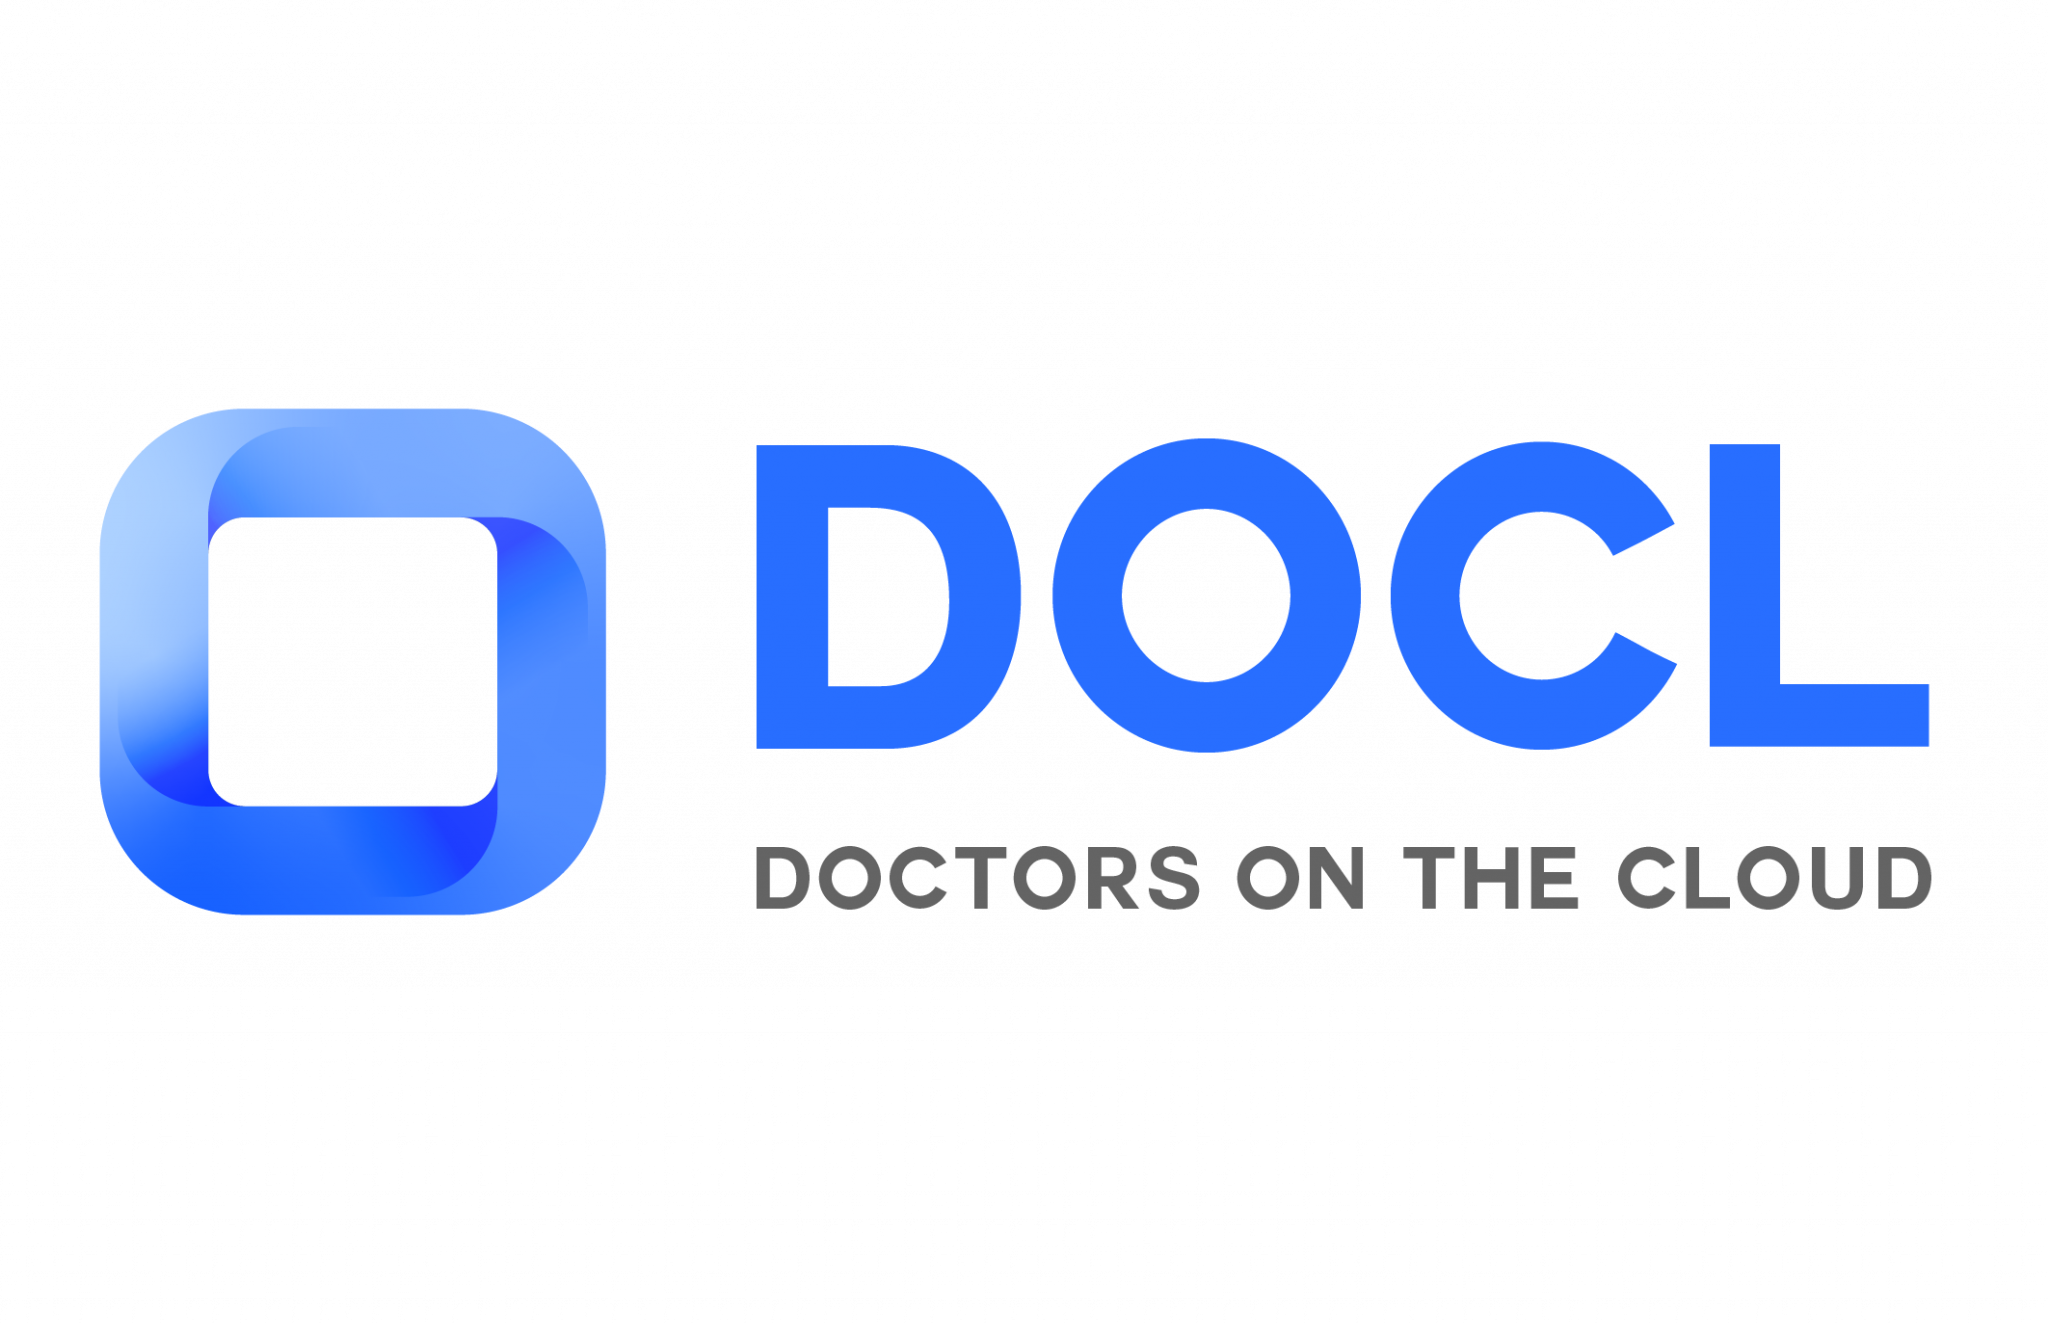 DOCL Official